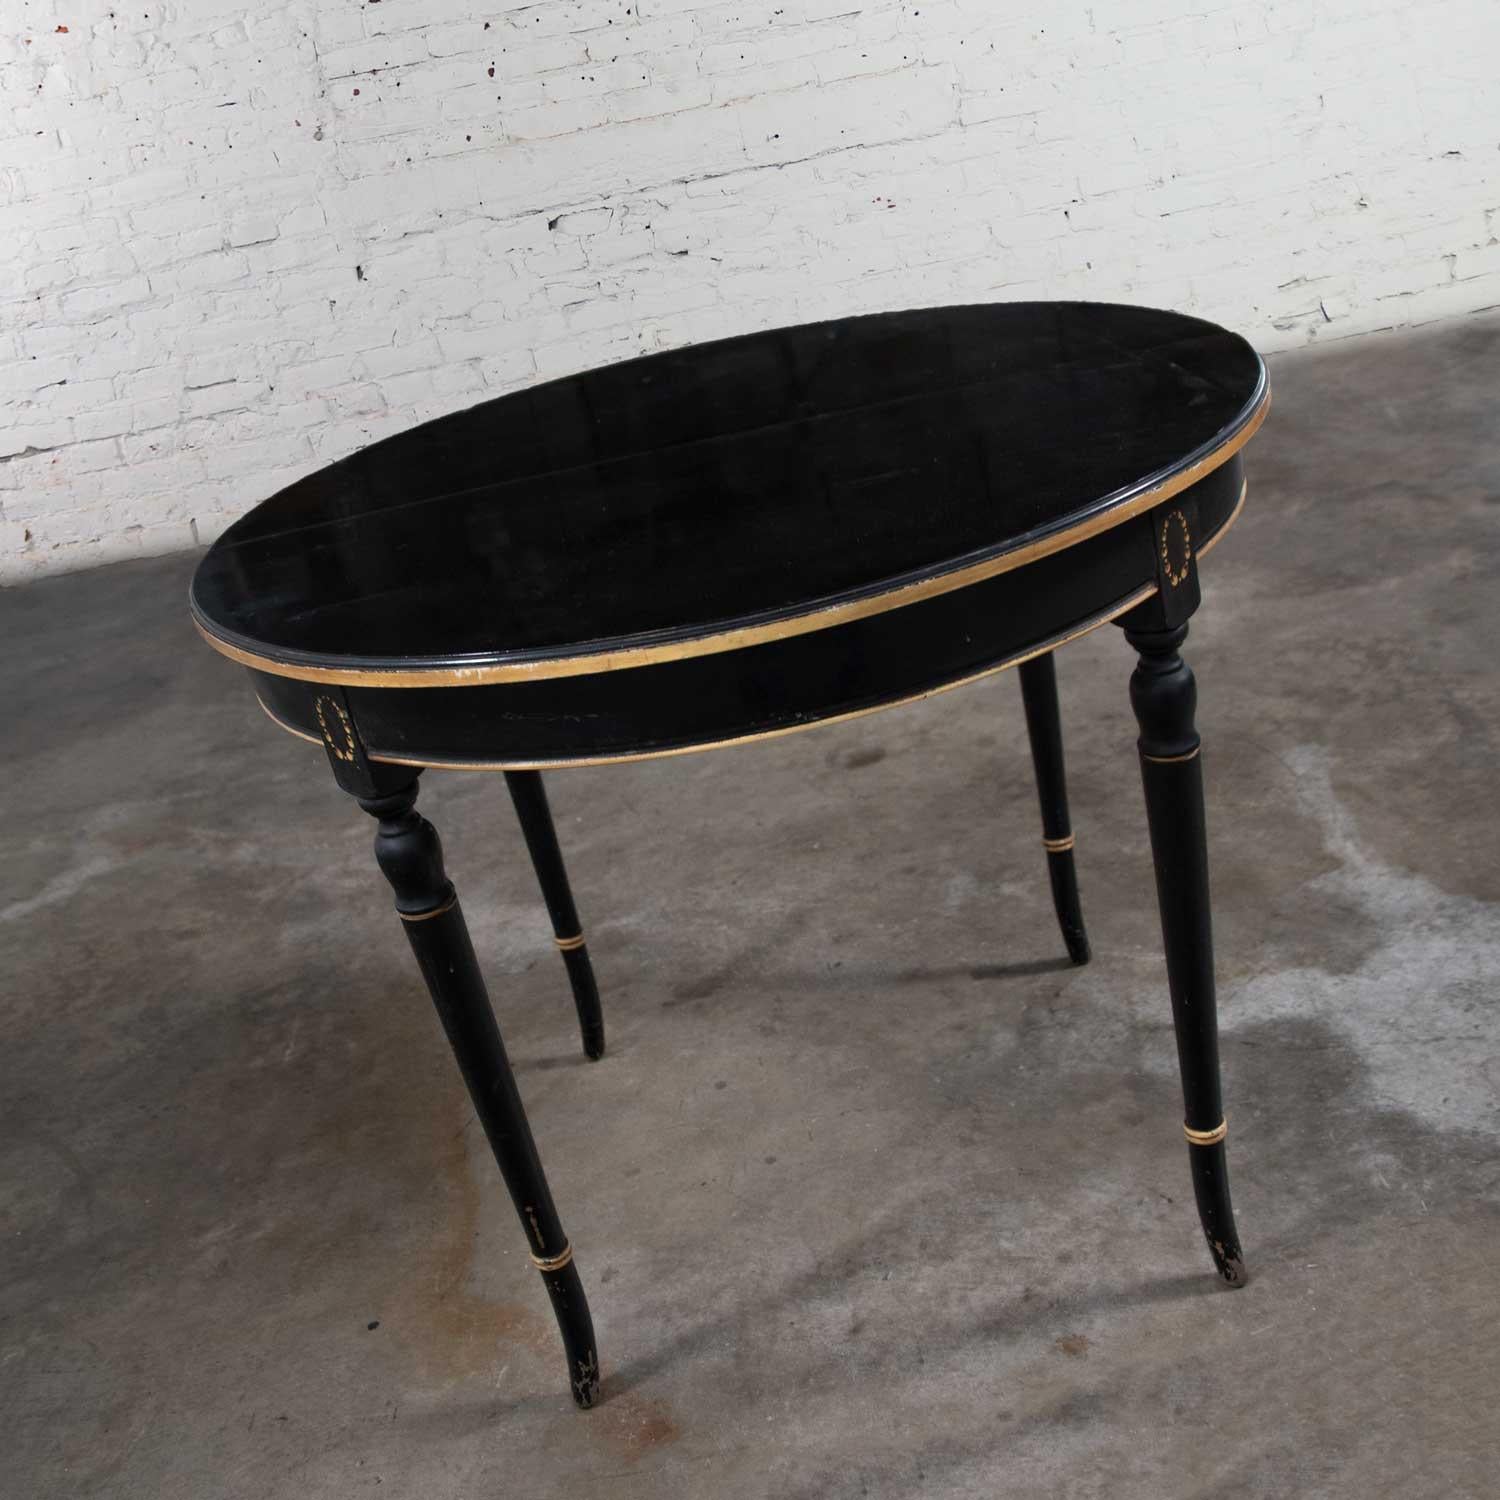 Handsome round neoclassical dining table or center table with its original black painted and perfectly age-distressed finish with gold painted details. It is in wonderful solid condition with a beautifully aged patina which includes wear to the